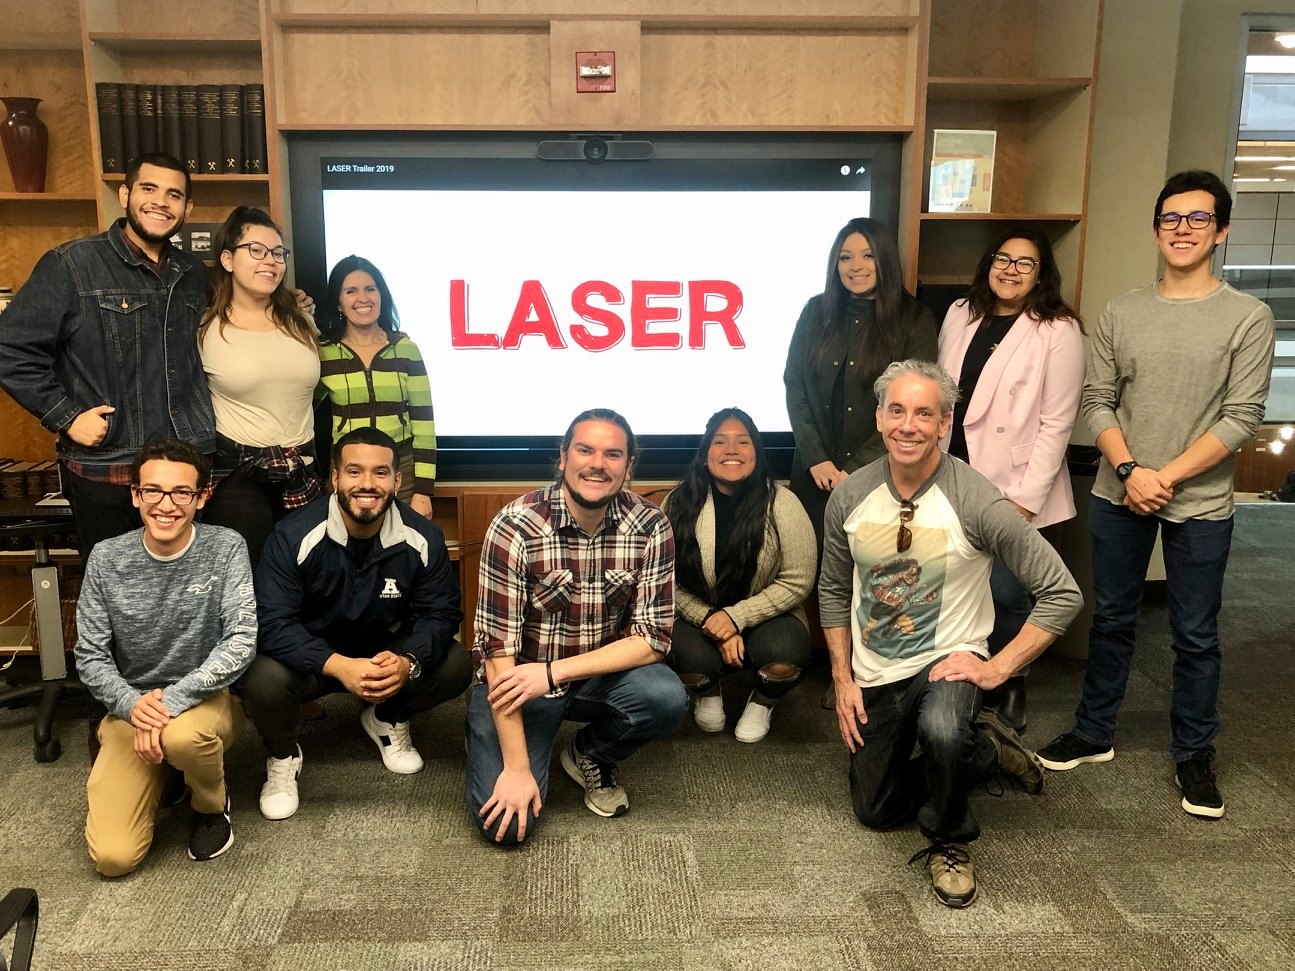 10/23/2019, Dr. Frederick Aldama and the LCC held a LASER information meeting.